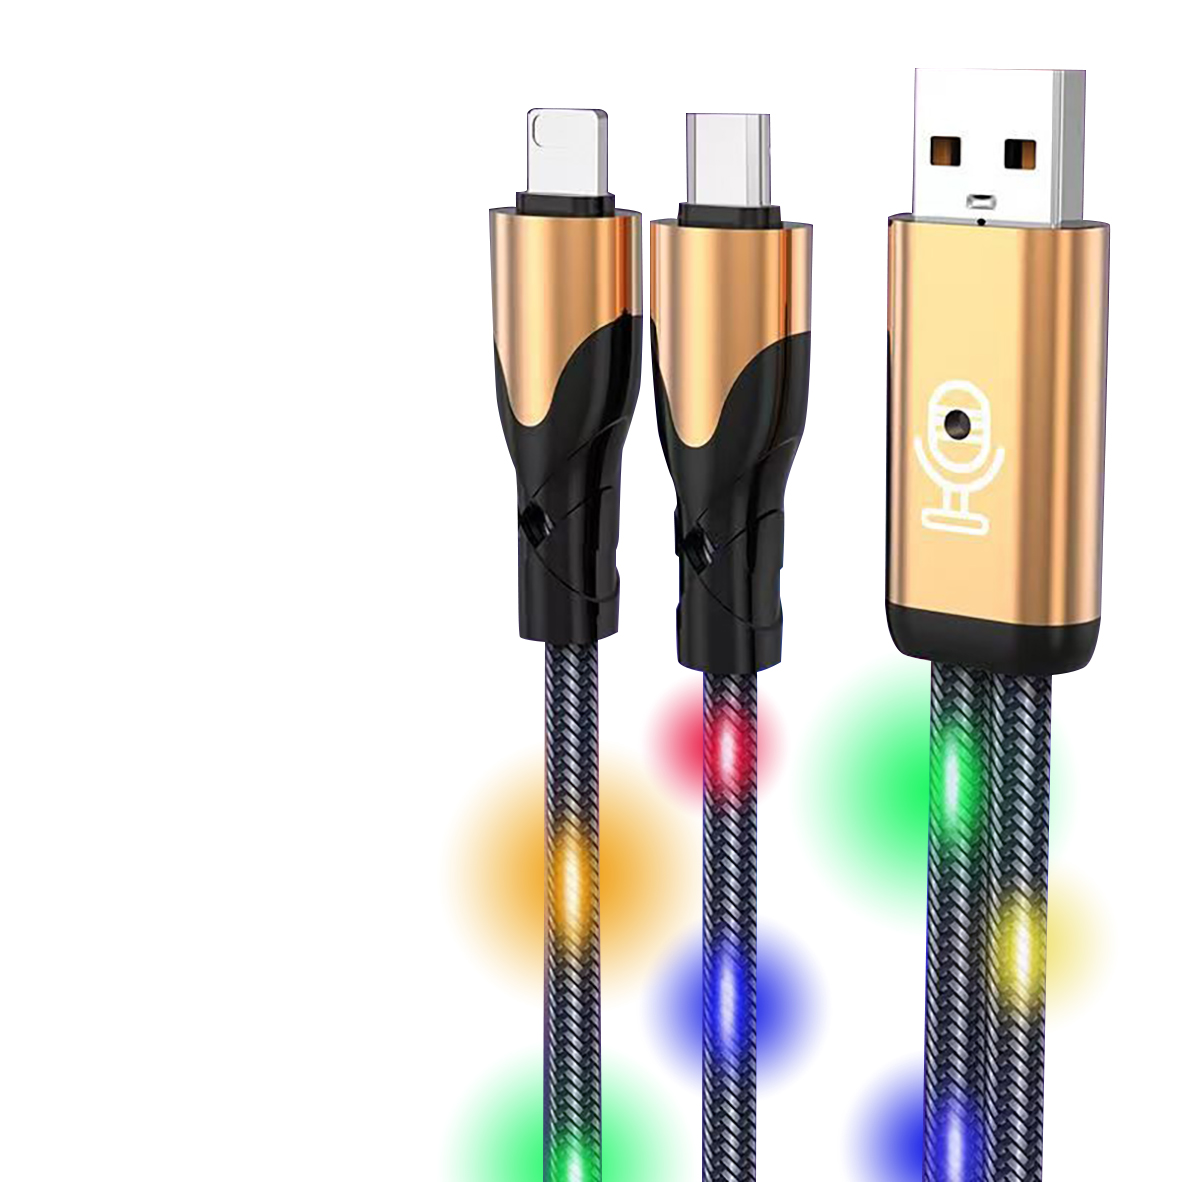 DAC125 2 in 1 Voice Control USB Cable